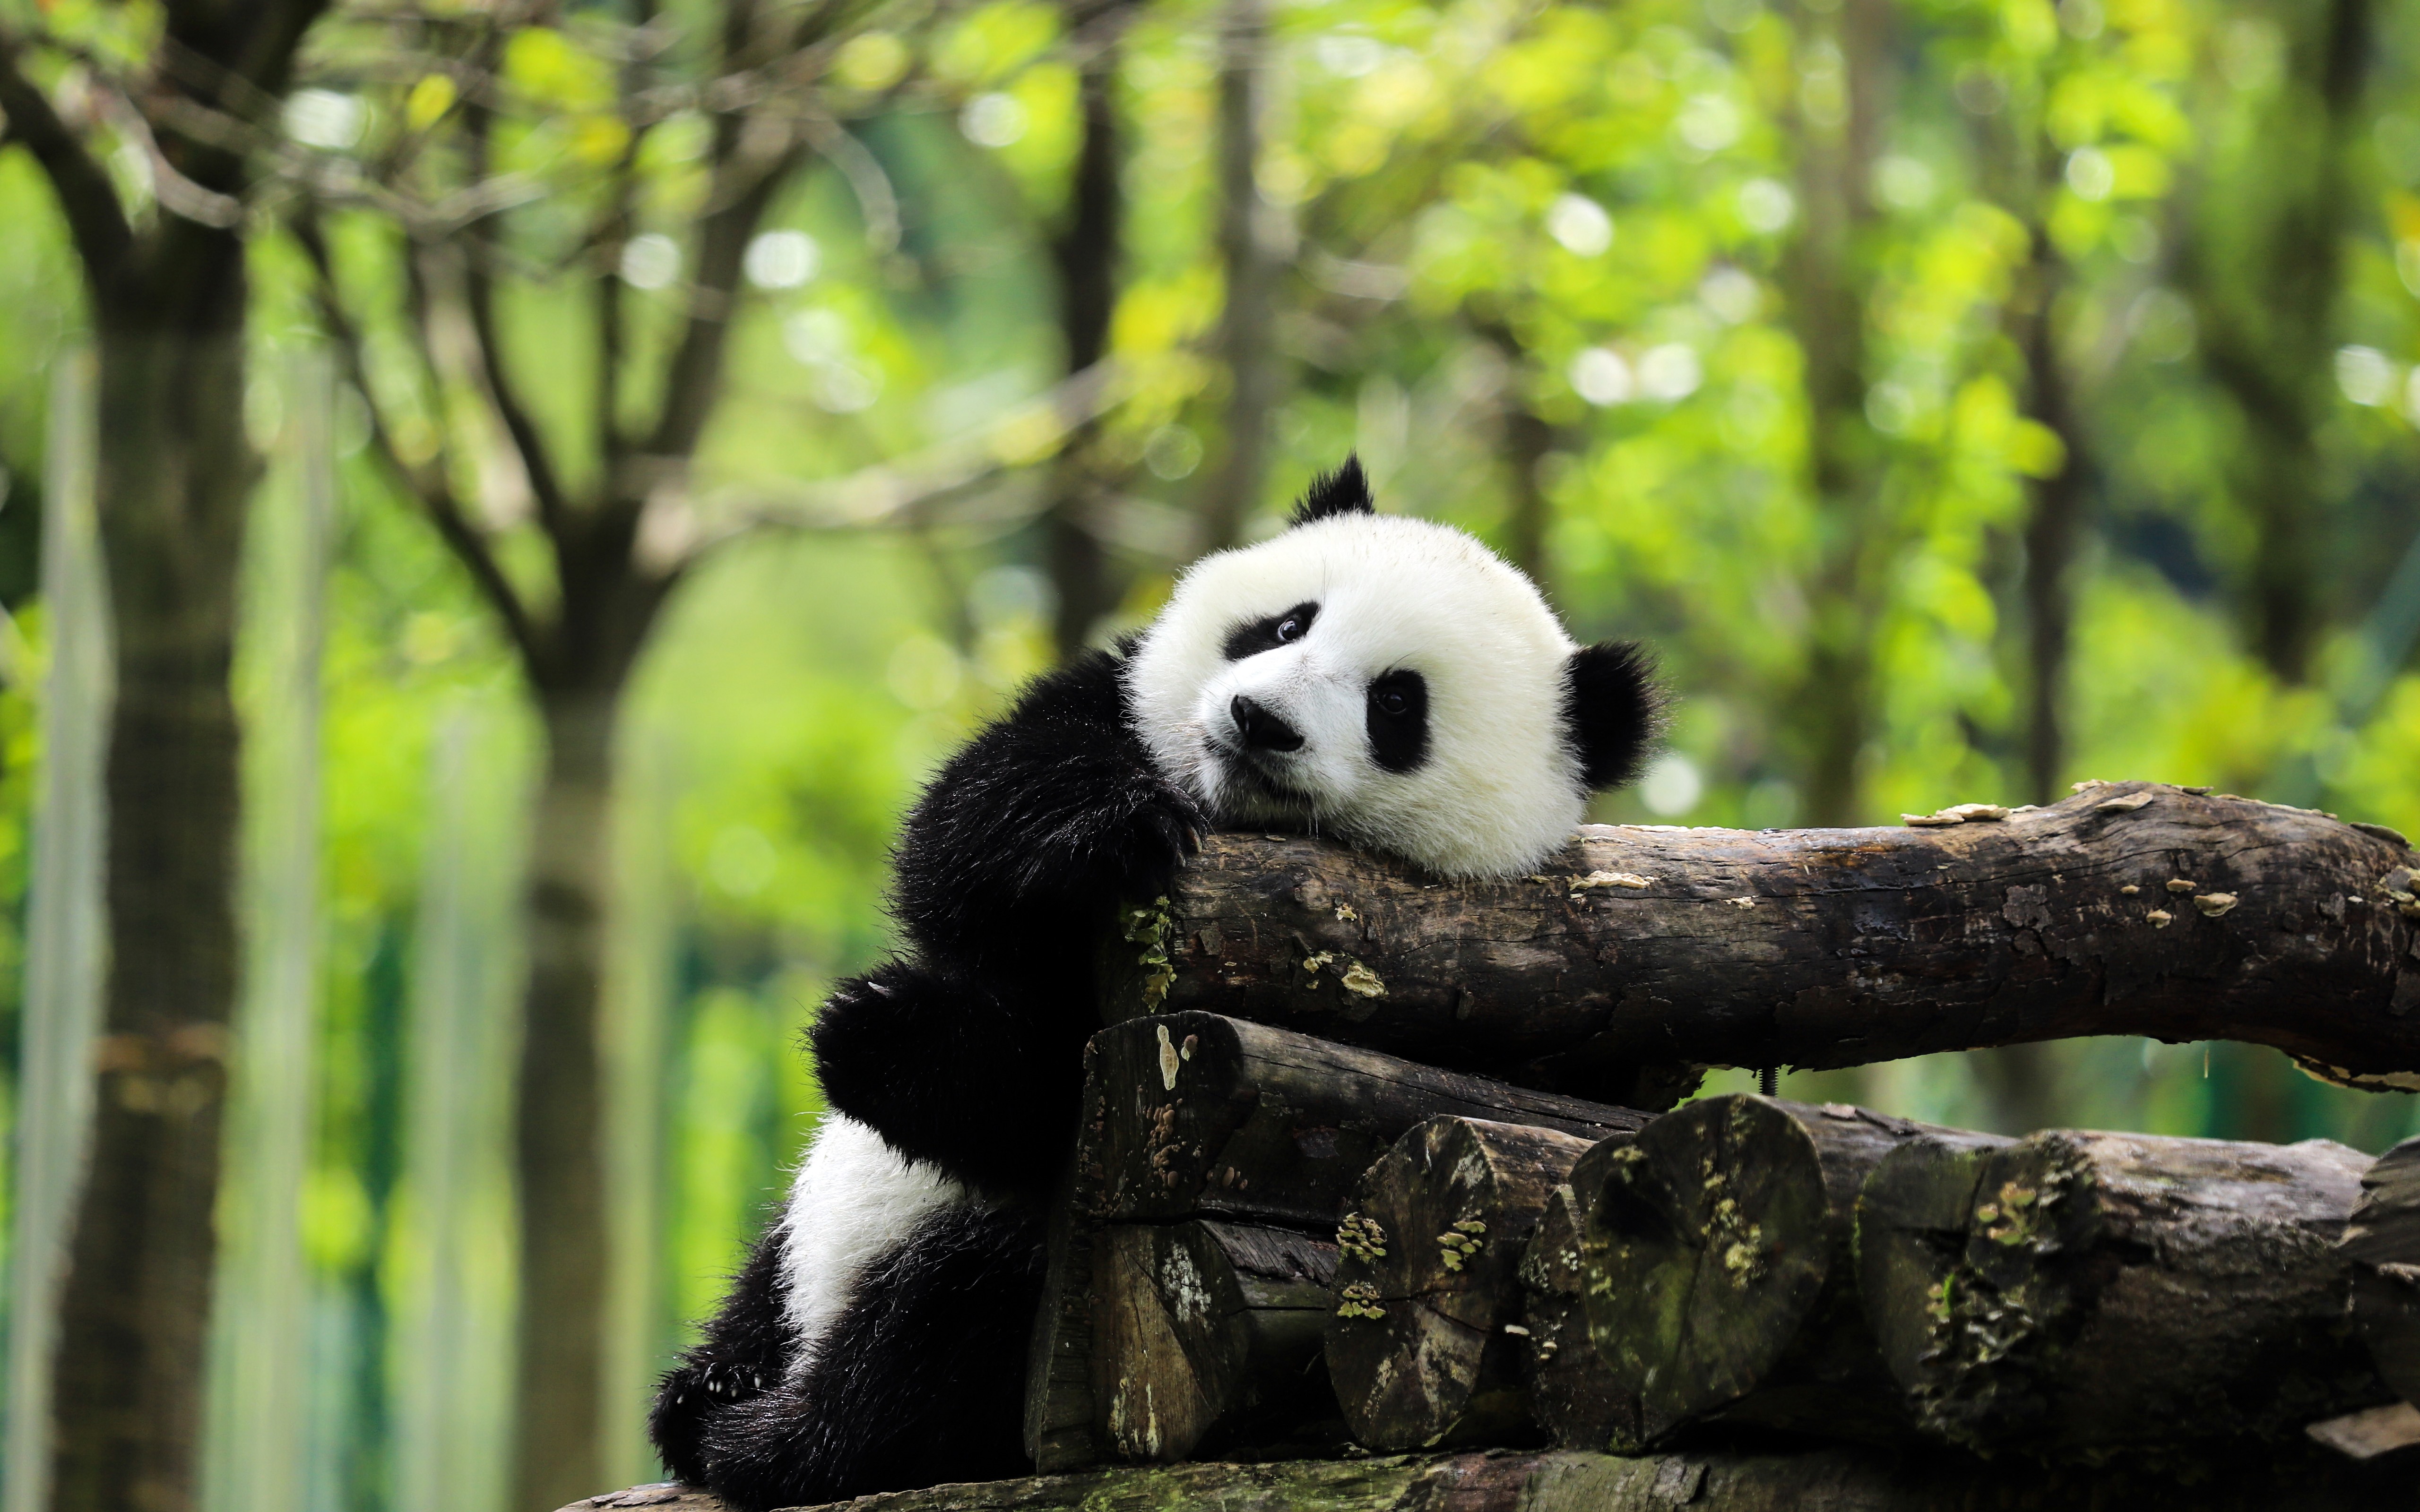 General 5120x3200 panda trees forest animals depth of field